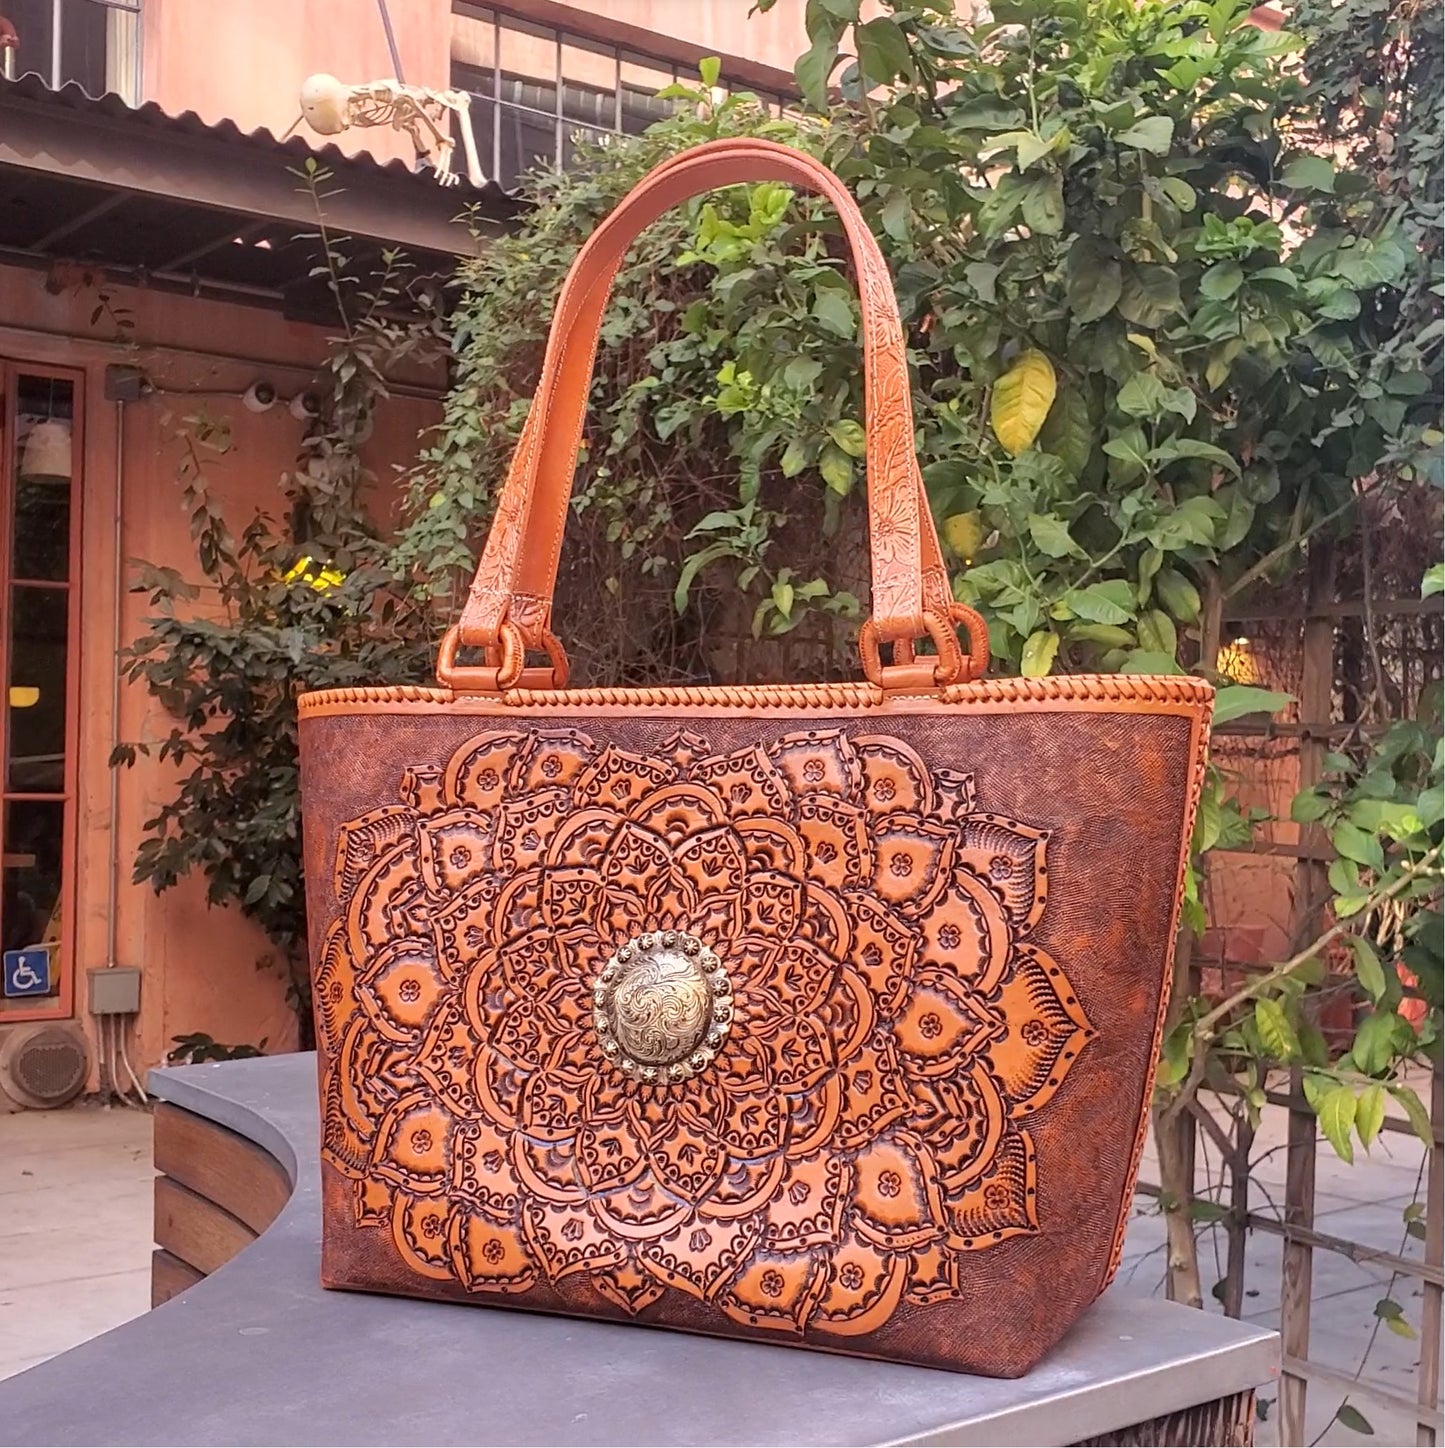 Hand Made Leather Tote Bag "MIA" by MIOHERMOSA Honey Mia